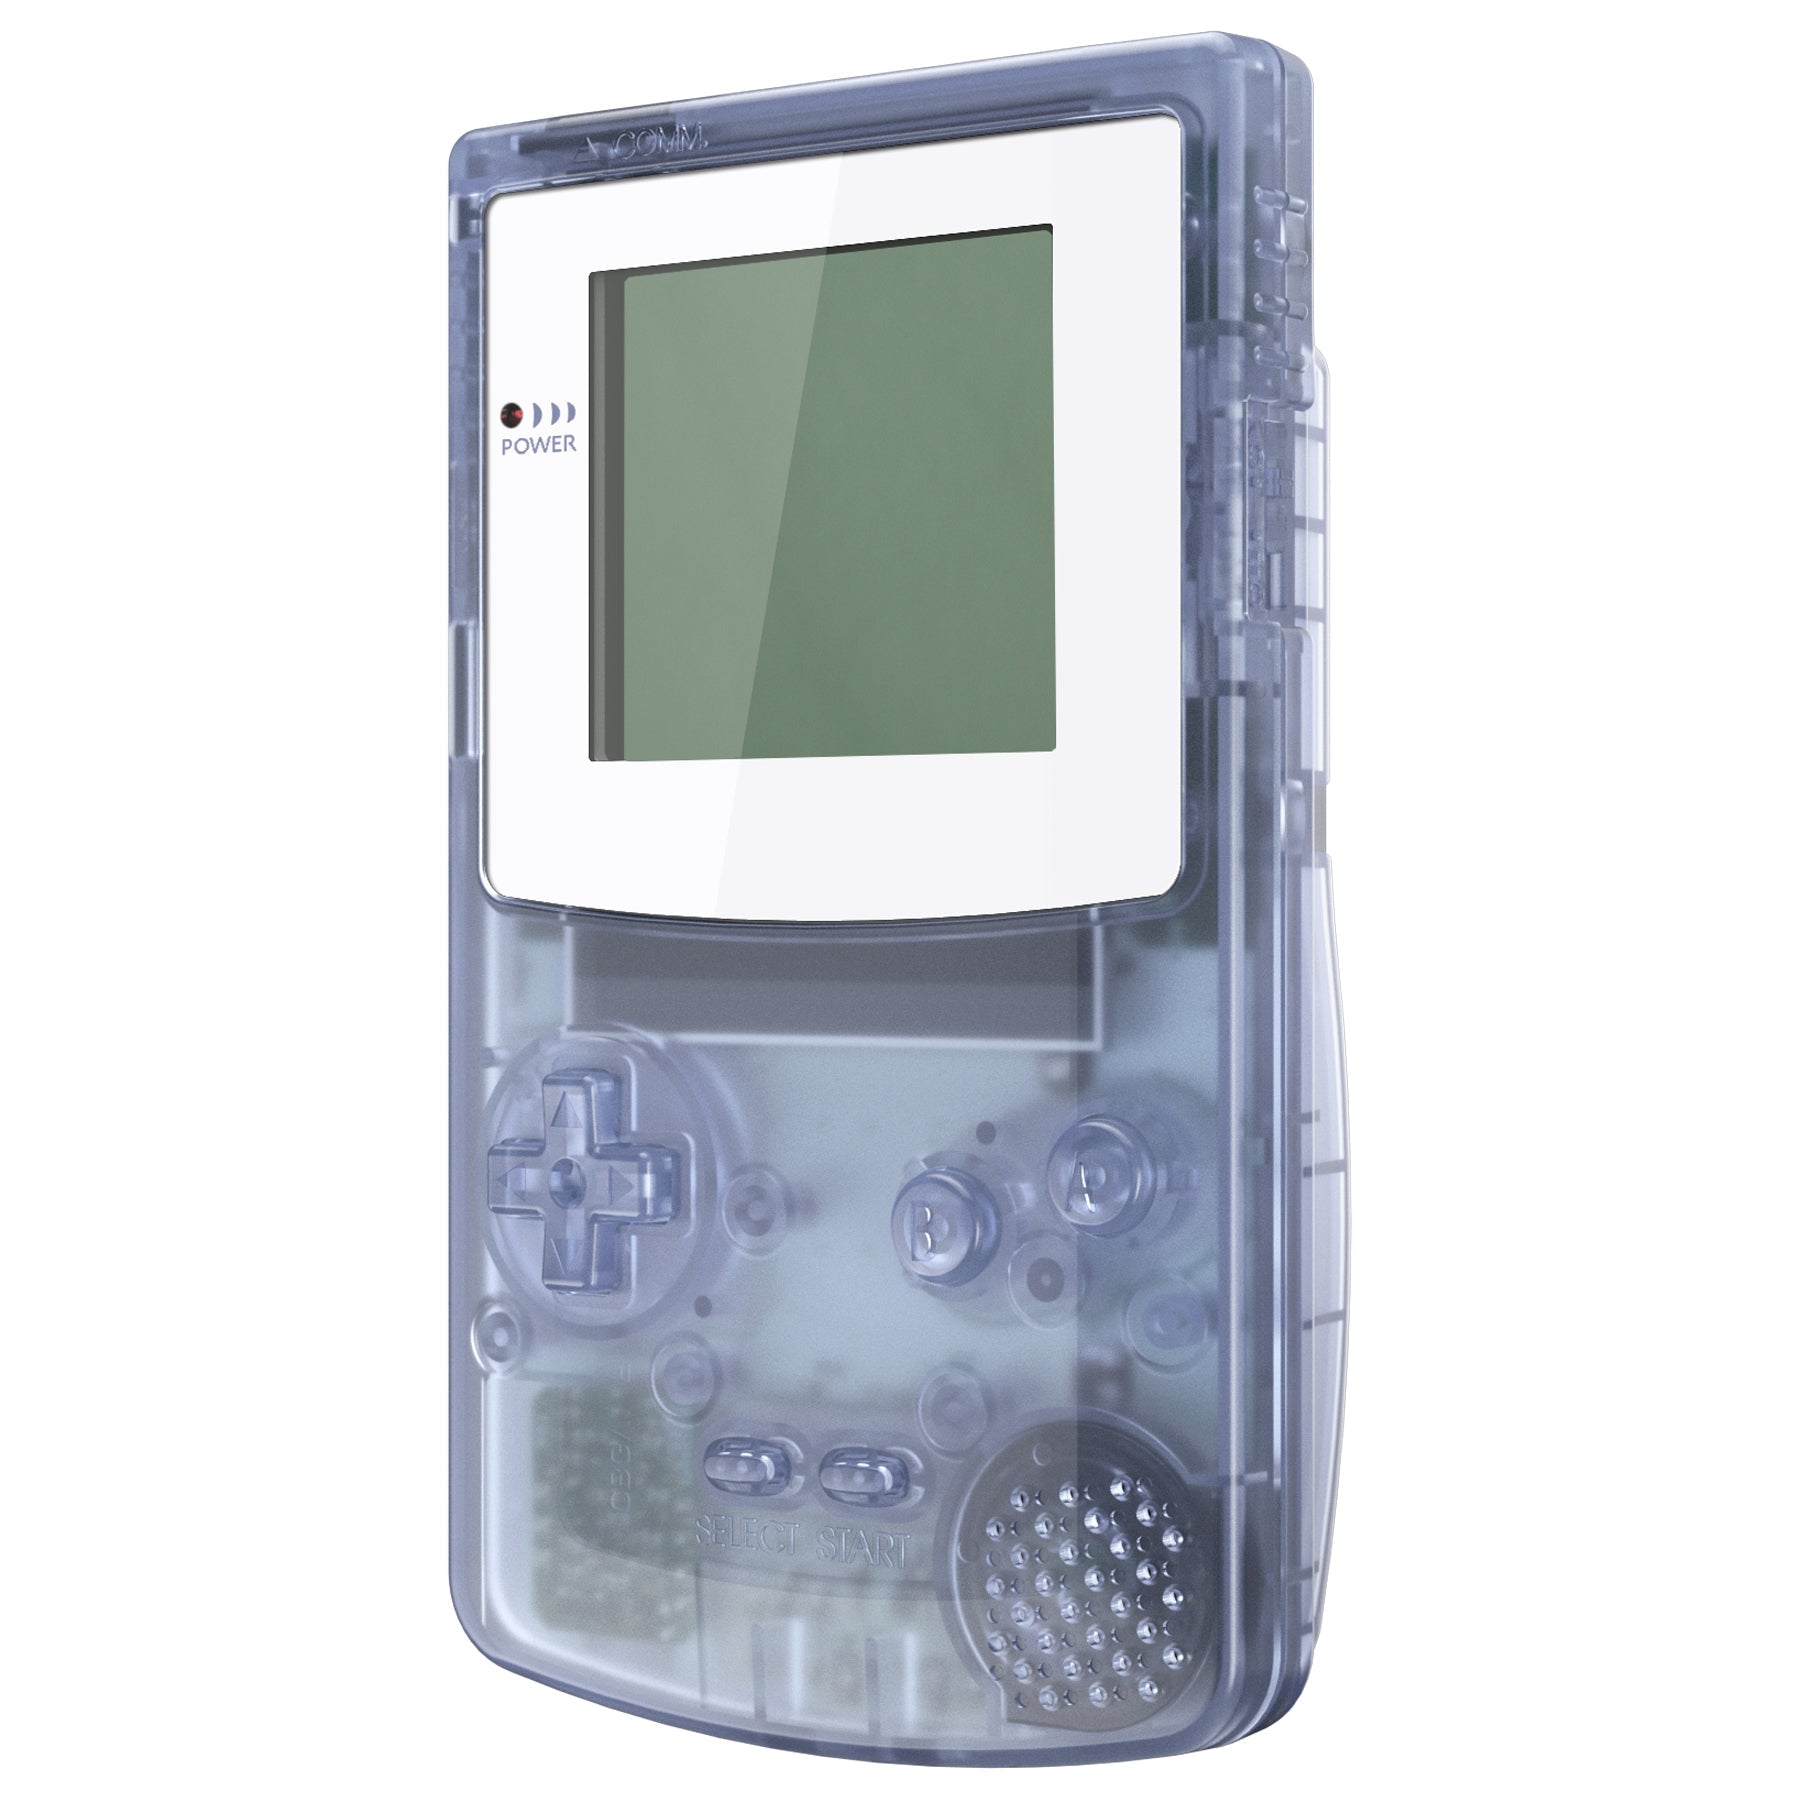 eXtremeRate Retail IPS Ready Upgraded eXtremeRate Glacier Blue Replacement Shell Full Housing Cover & Buttons for Gameboy Color - Fit for GBC OSD IPS & Regular IPS & Standard LCD - Console & IPS Screen NOT Included - QCBM5006